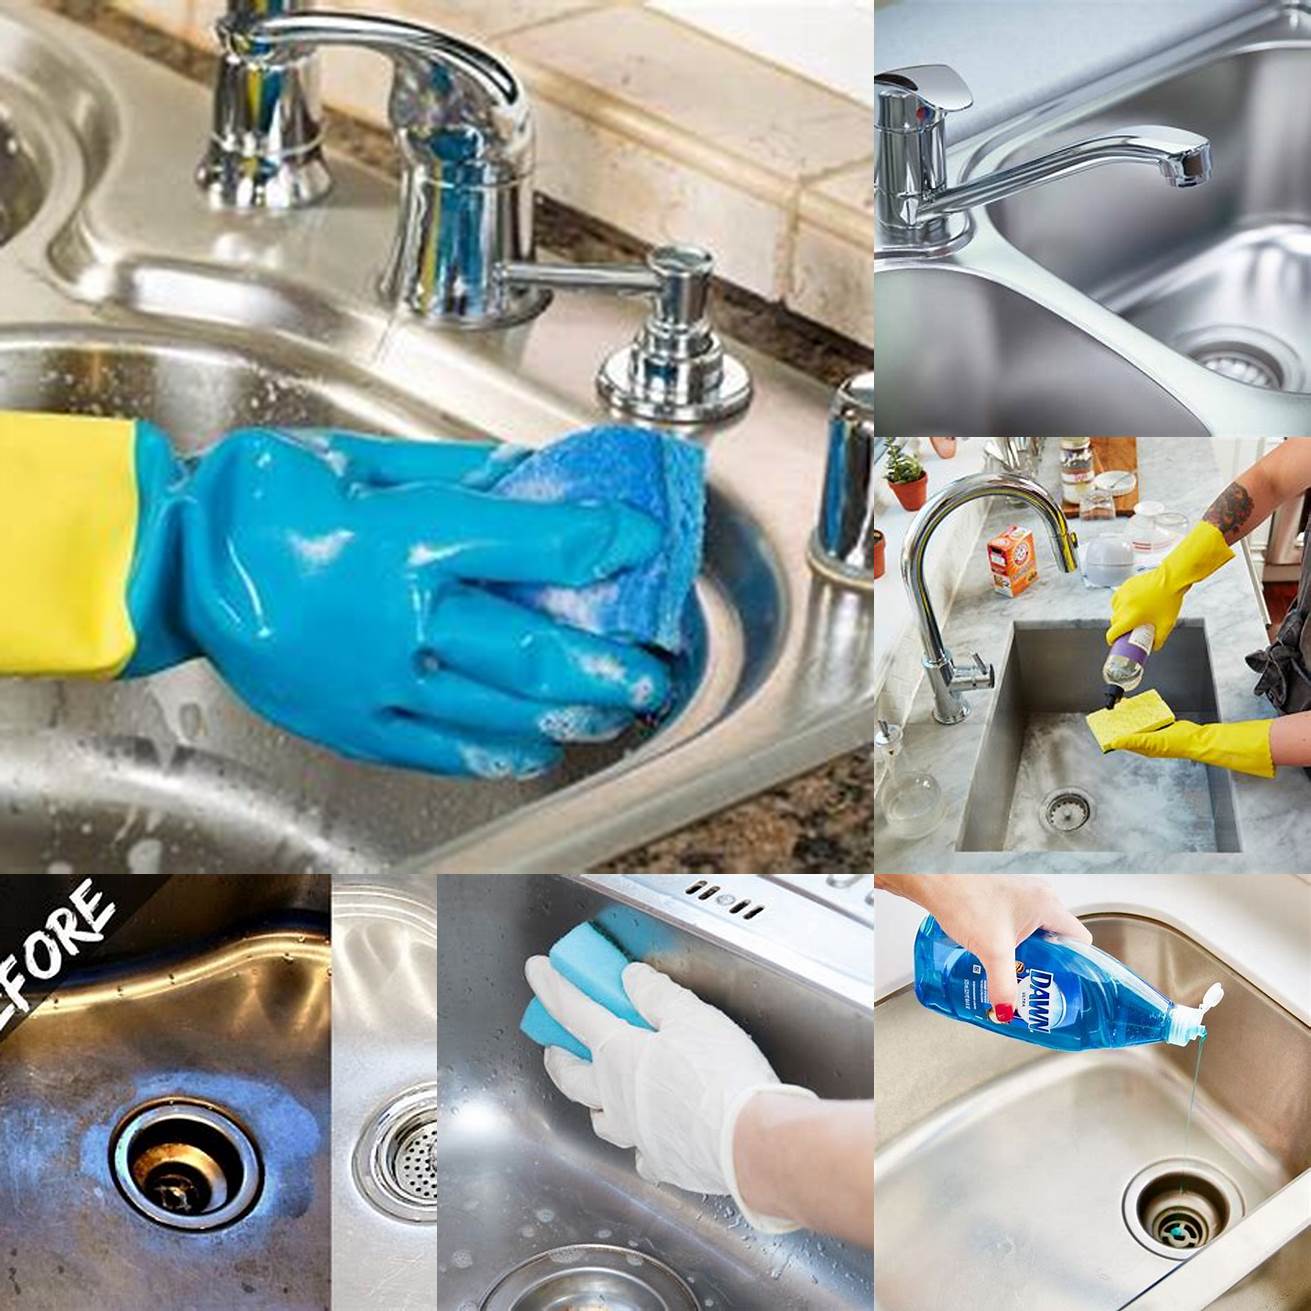 Regularly clean and maintain your sink to keep it looking new